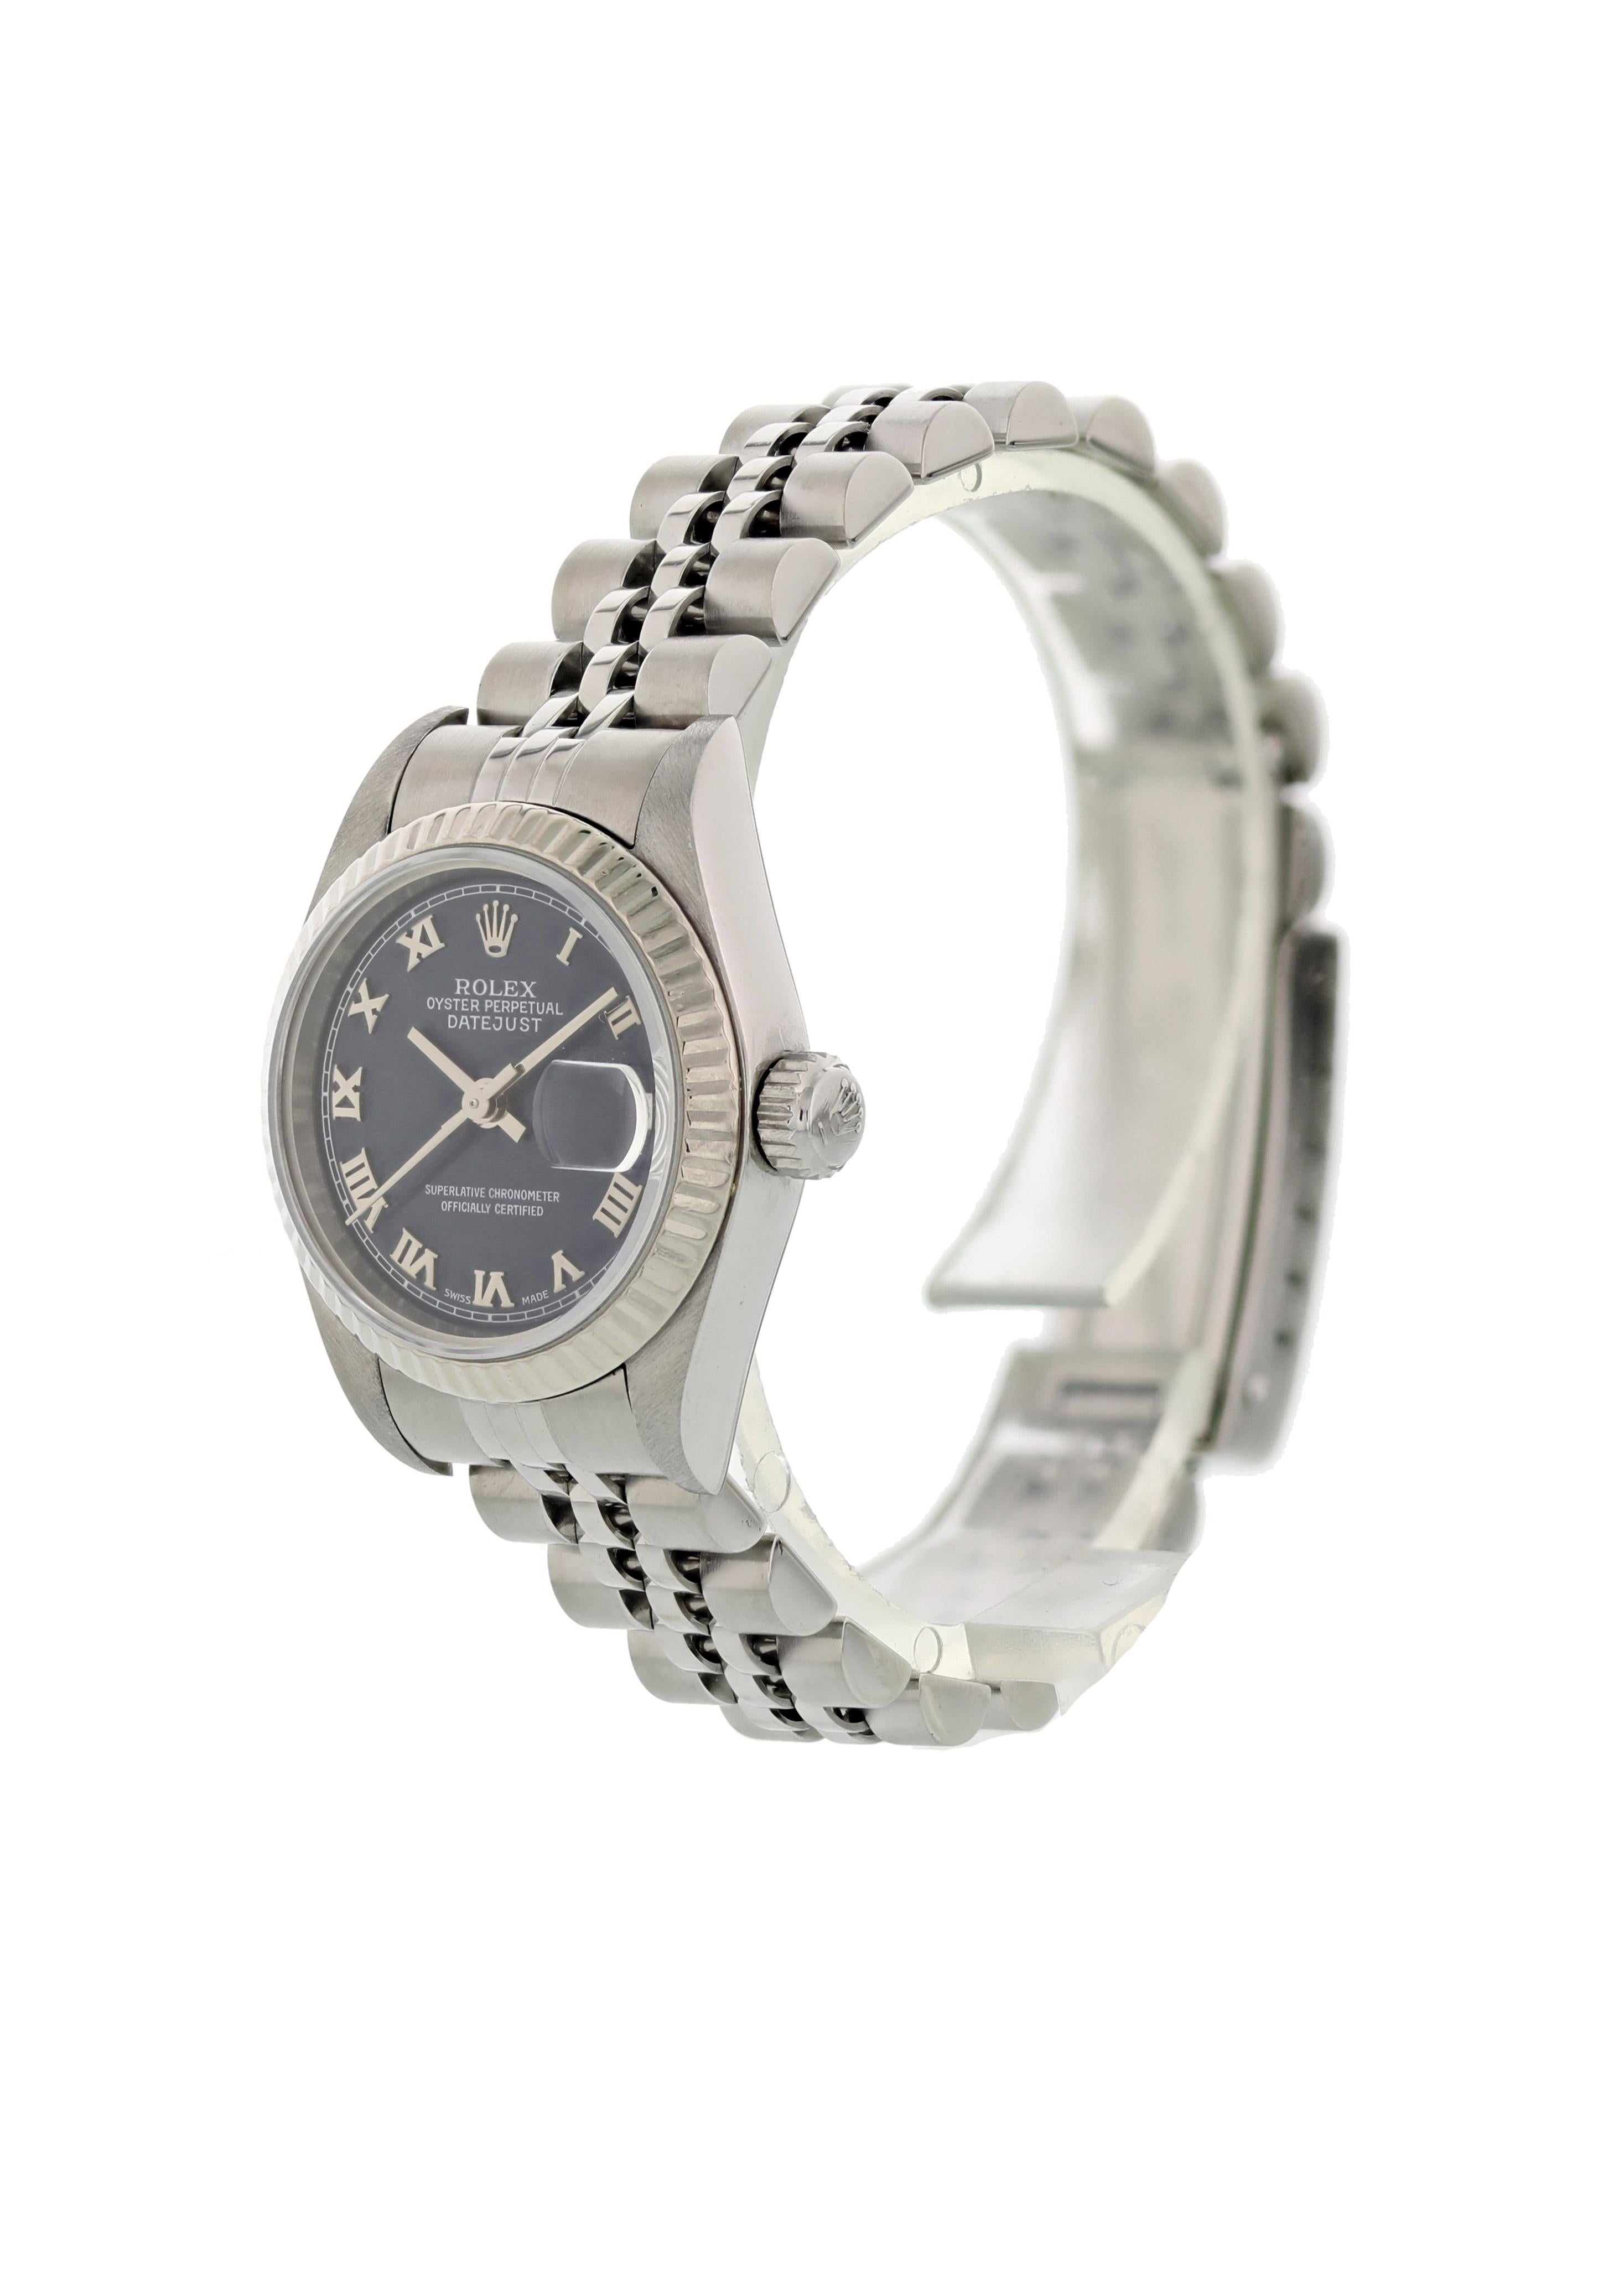 Rolex Oyster Perpetual Datejust 79174 Ladies Watch.  26mm Stainless steel case. 18K white gold fluted bezel. Blue dial with steel hands and Roman numeral markers. Quickset date display at the 3 o'clock position. Stainless steel jubilee bracelet with